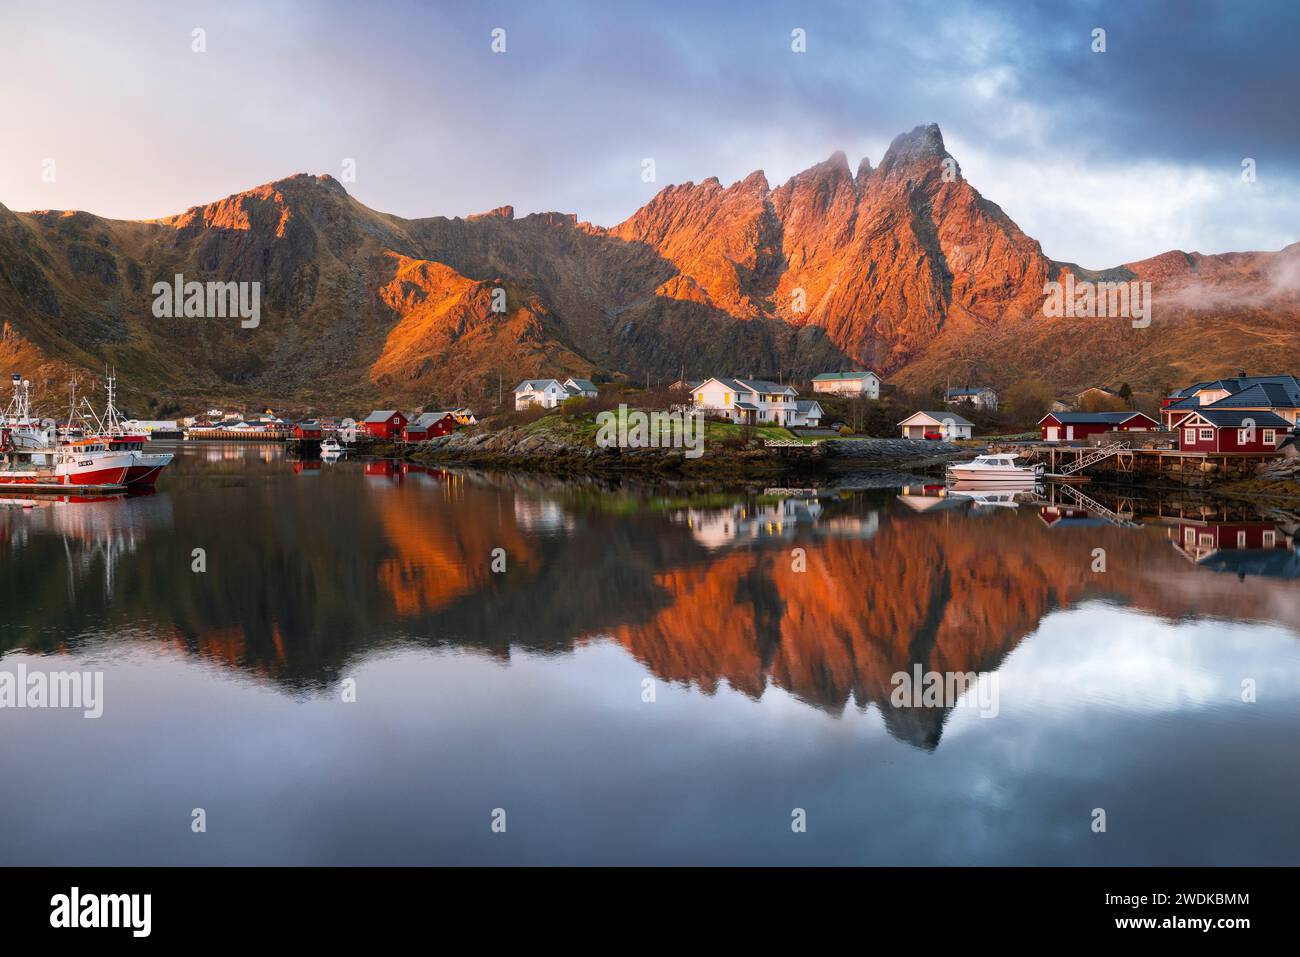 Reflections of houses and mountains in the water at Ballstad village during sunrise, Vestvagoy, Nordland, Lofoten Islands, Norway, Northern Europe Stock Photo